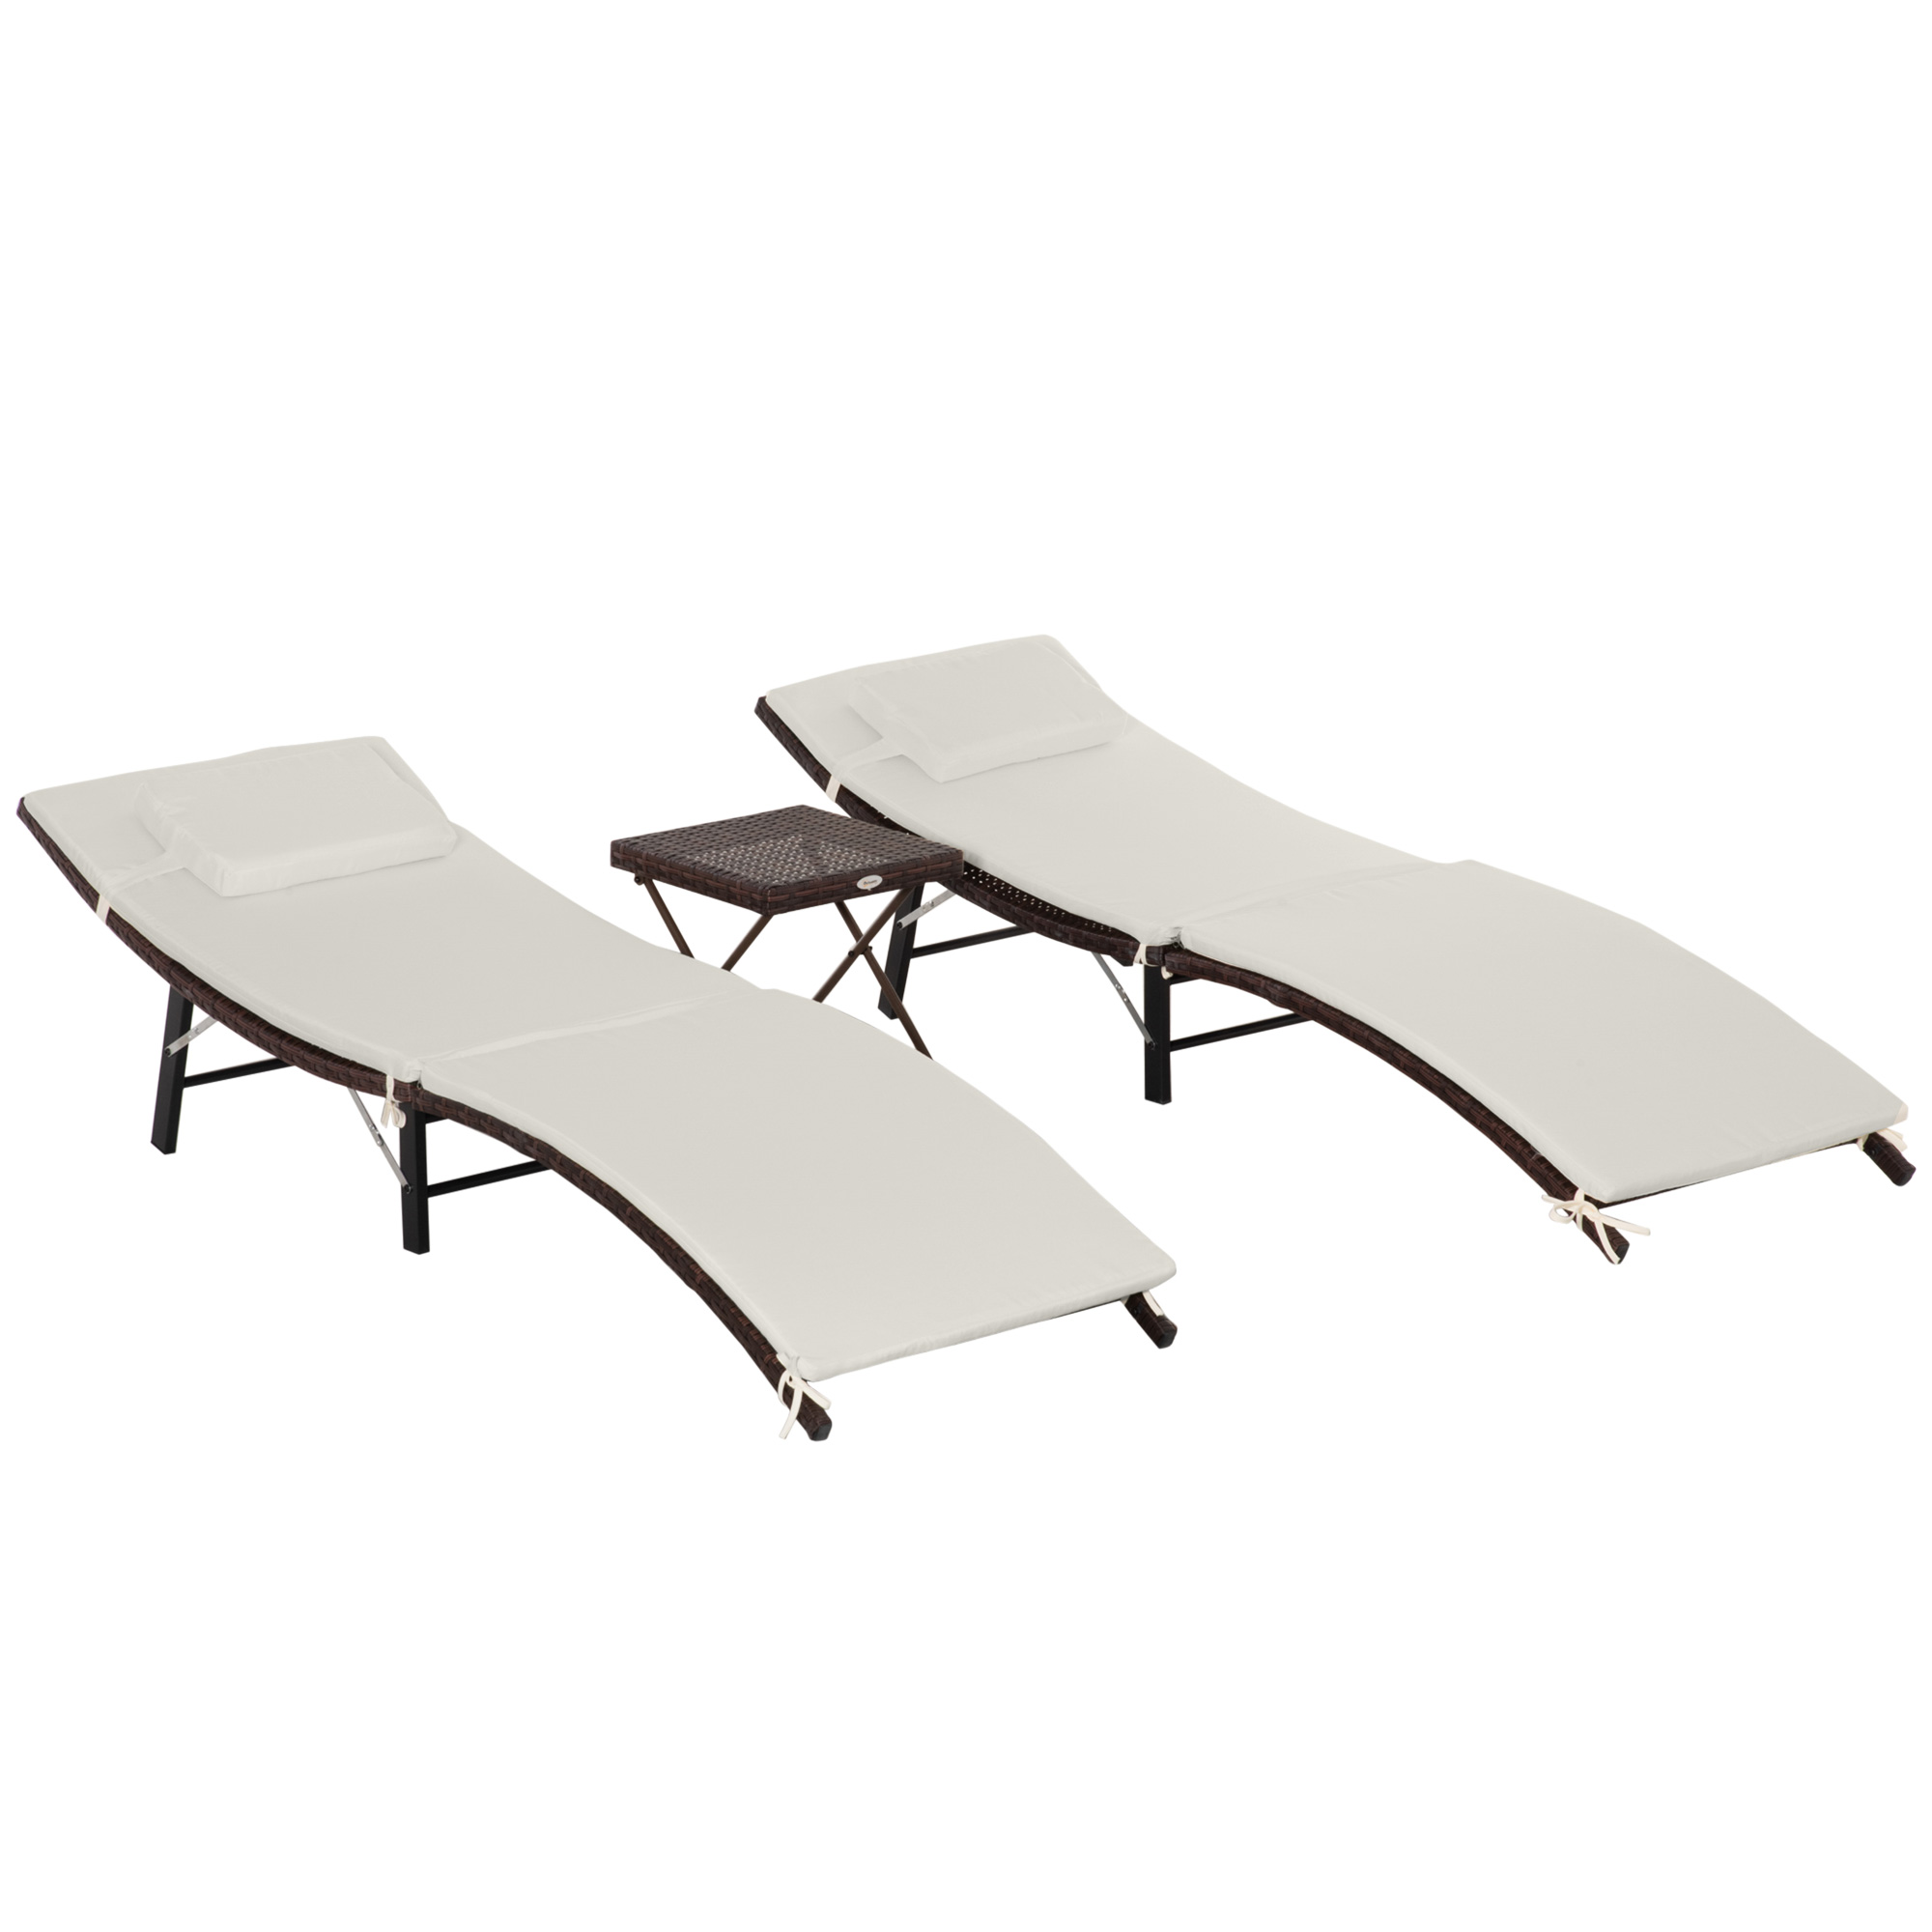 Outsunny Folding Chaise Lounge Pool Chair Set with Table, Beige - image 1 of 9